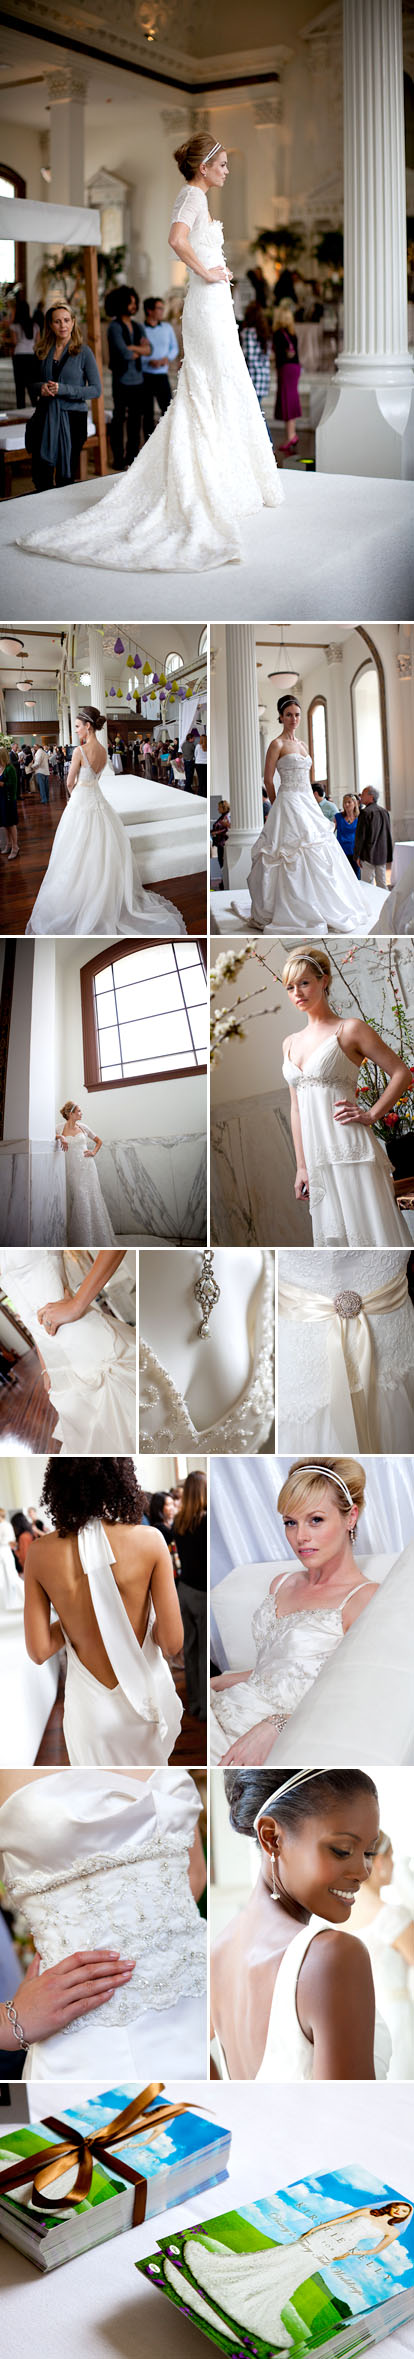 Kirstie Kelly Couture wedding fashion at A Soolip Wedding, images by Junebug Weddings